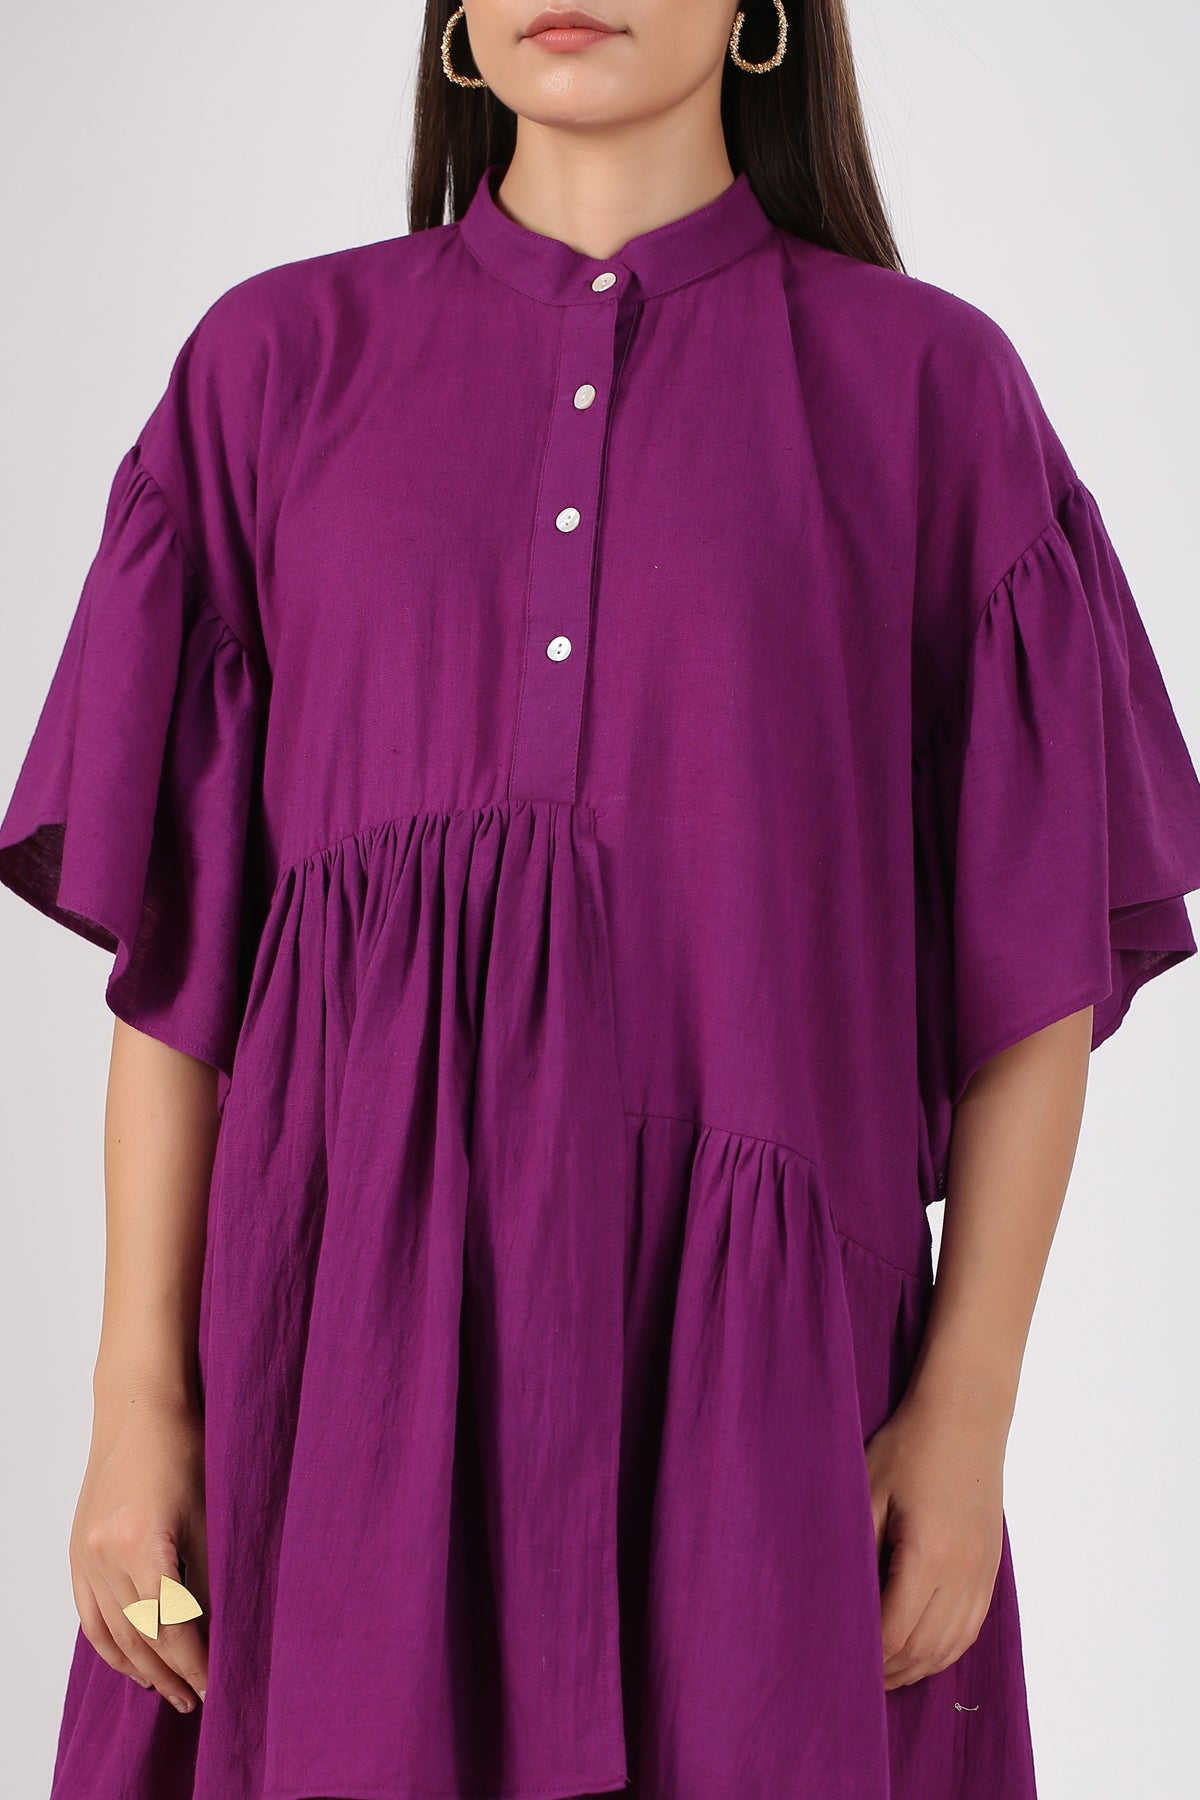 Purple Mini Dress at Kamakhyaa by MOH-The Eternal Dhaga. This item is Casual Wear, Cotton, Mini Dresses, Moh-The eternal Dhaga, Natural, Purple, Relaxed Fit, Shirt Dresses, Solids, Womenswear